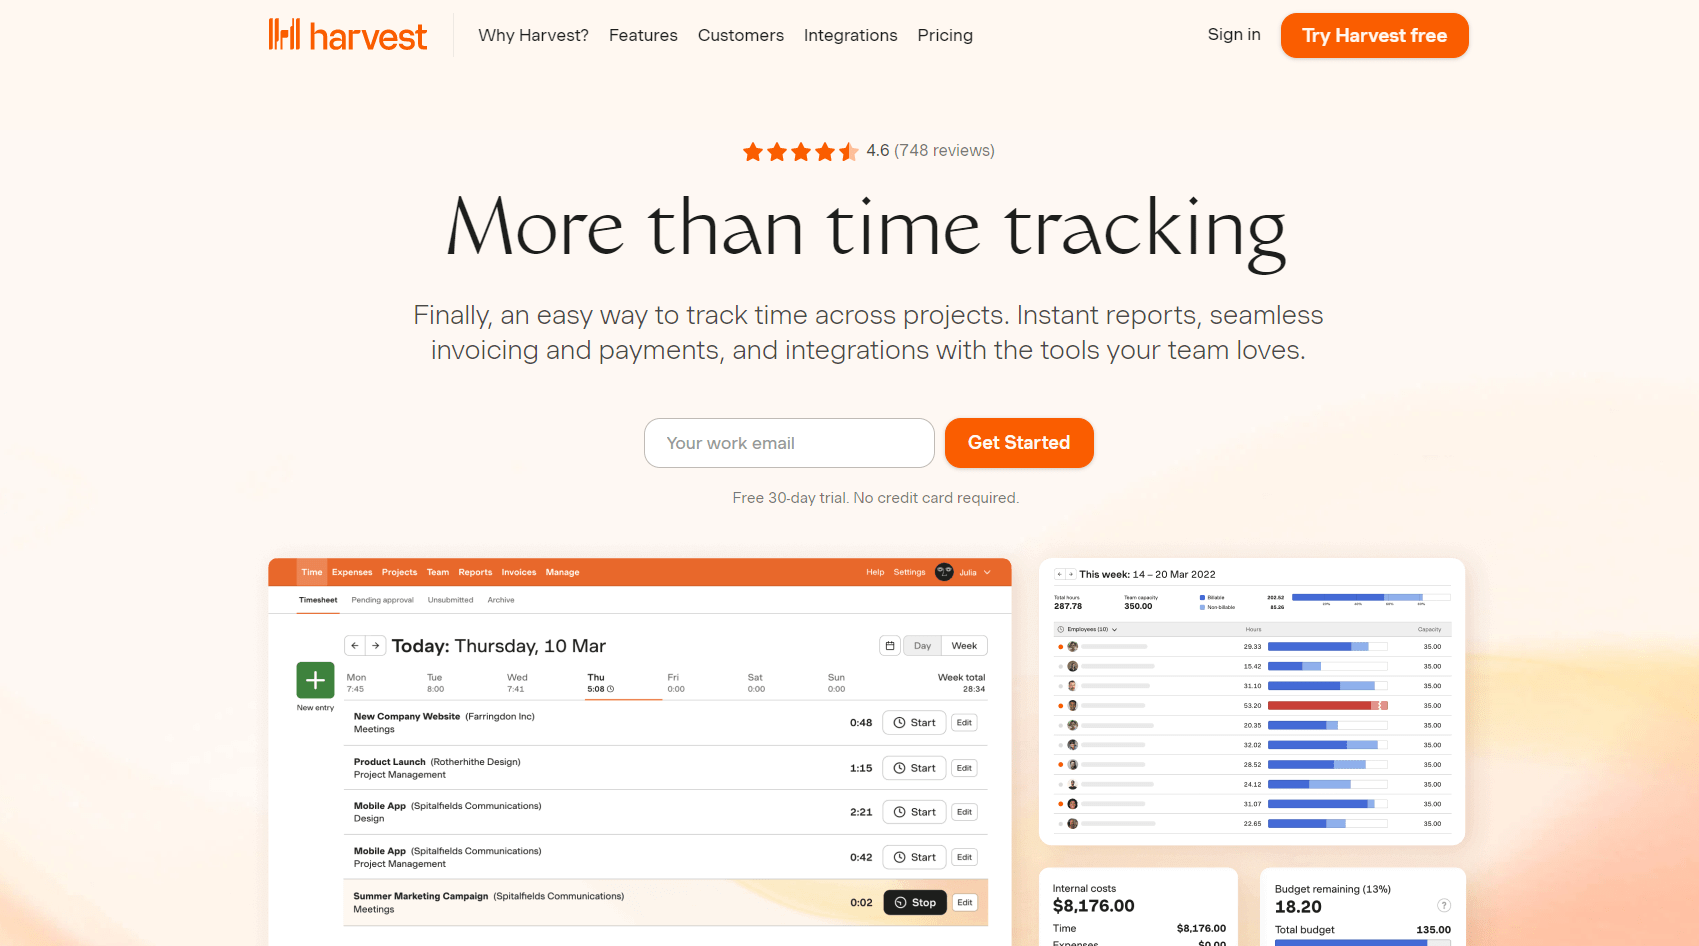 Homepage of Harvest, with caption "More than time tracking".